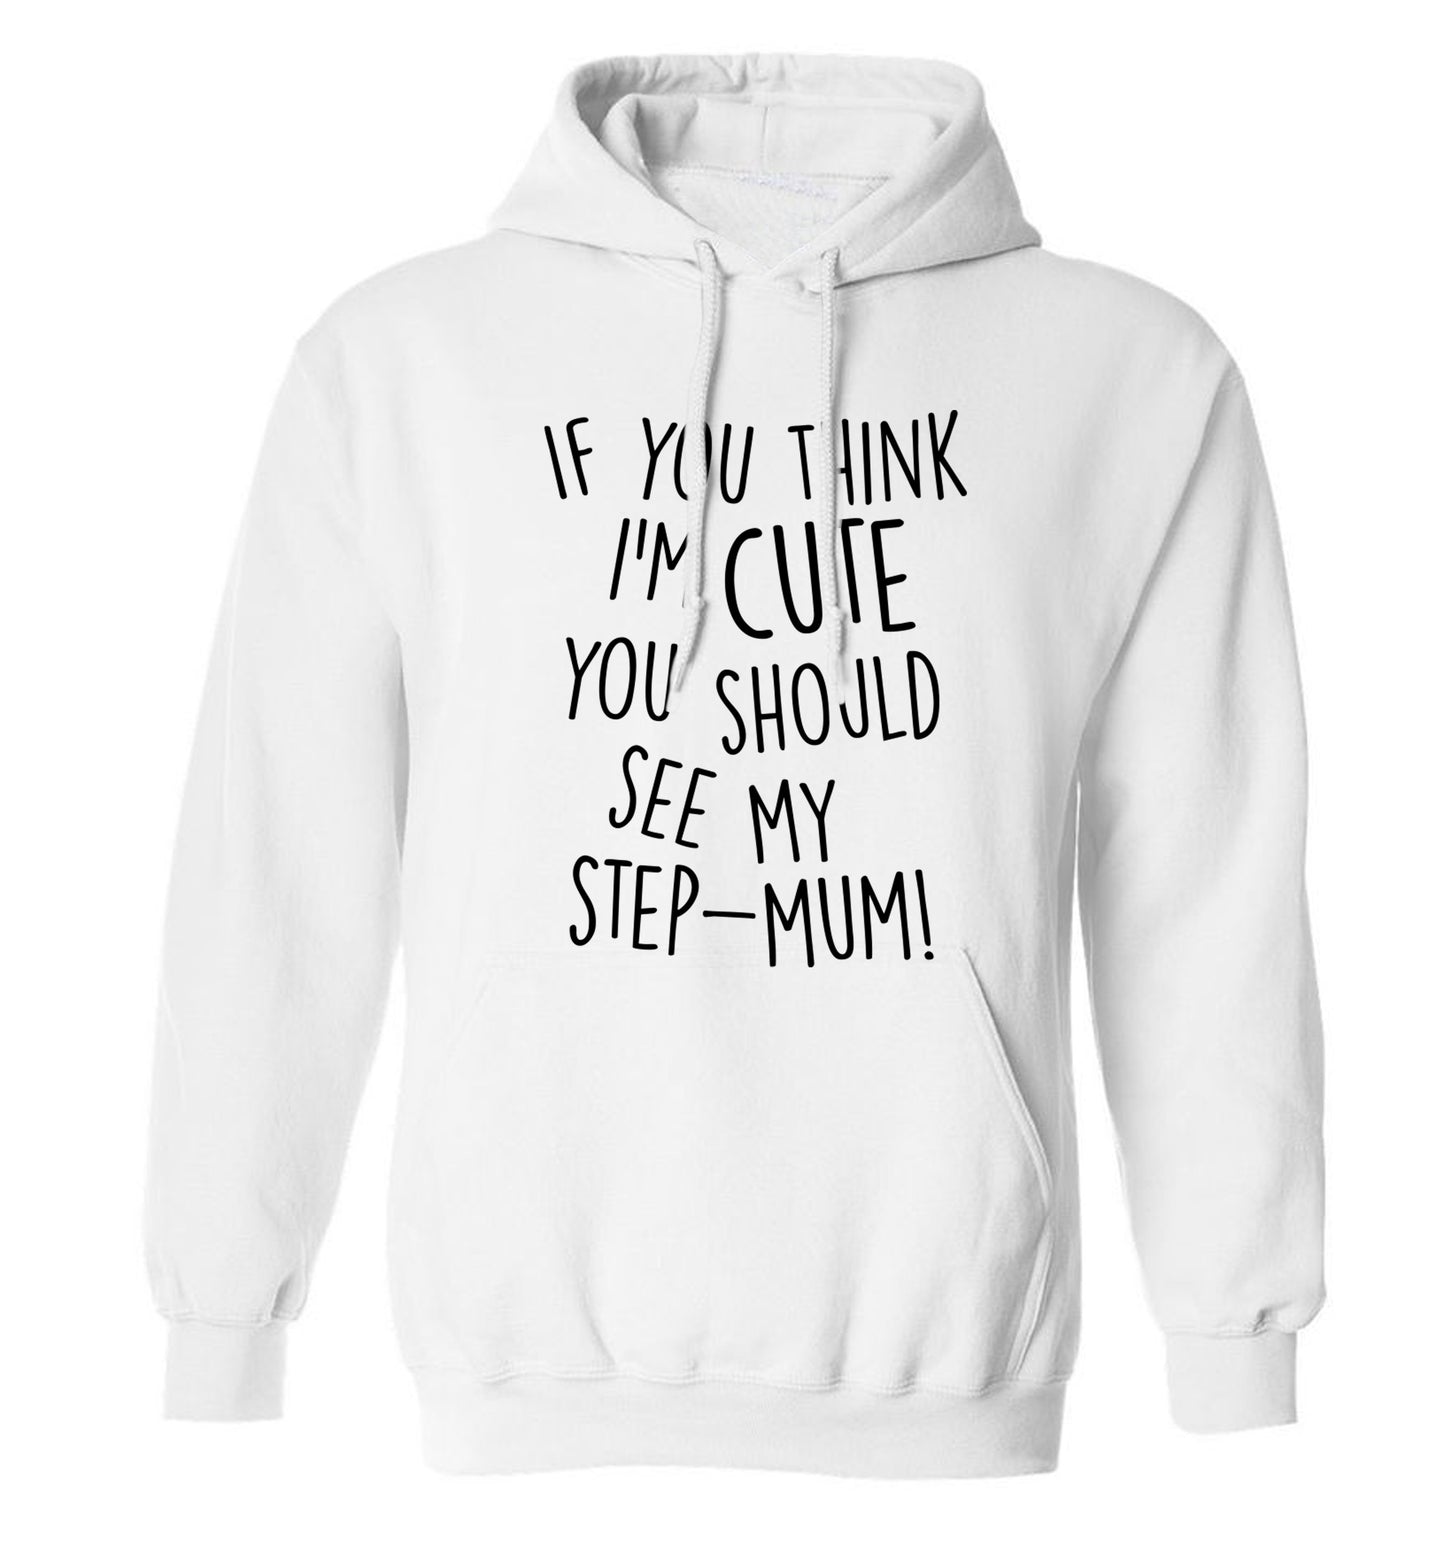 If you think I'm cute you should see my step-mum adults unisex white hoodie 2XL